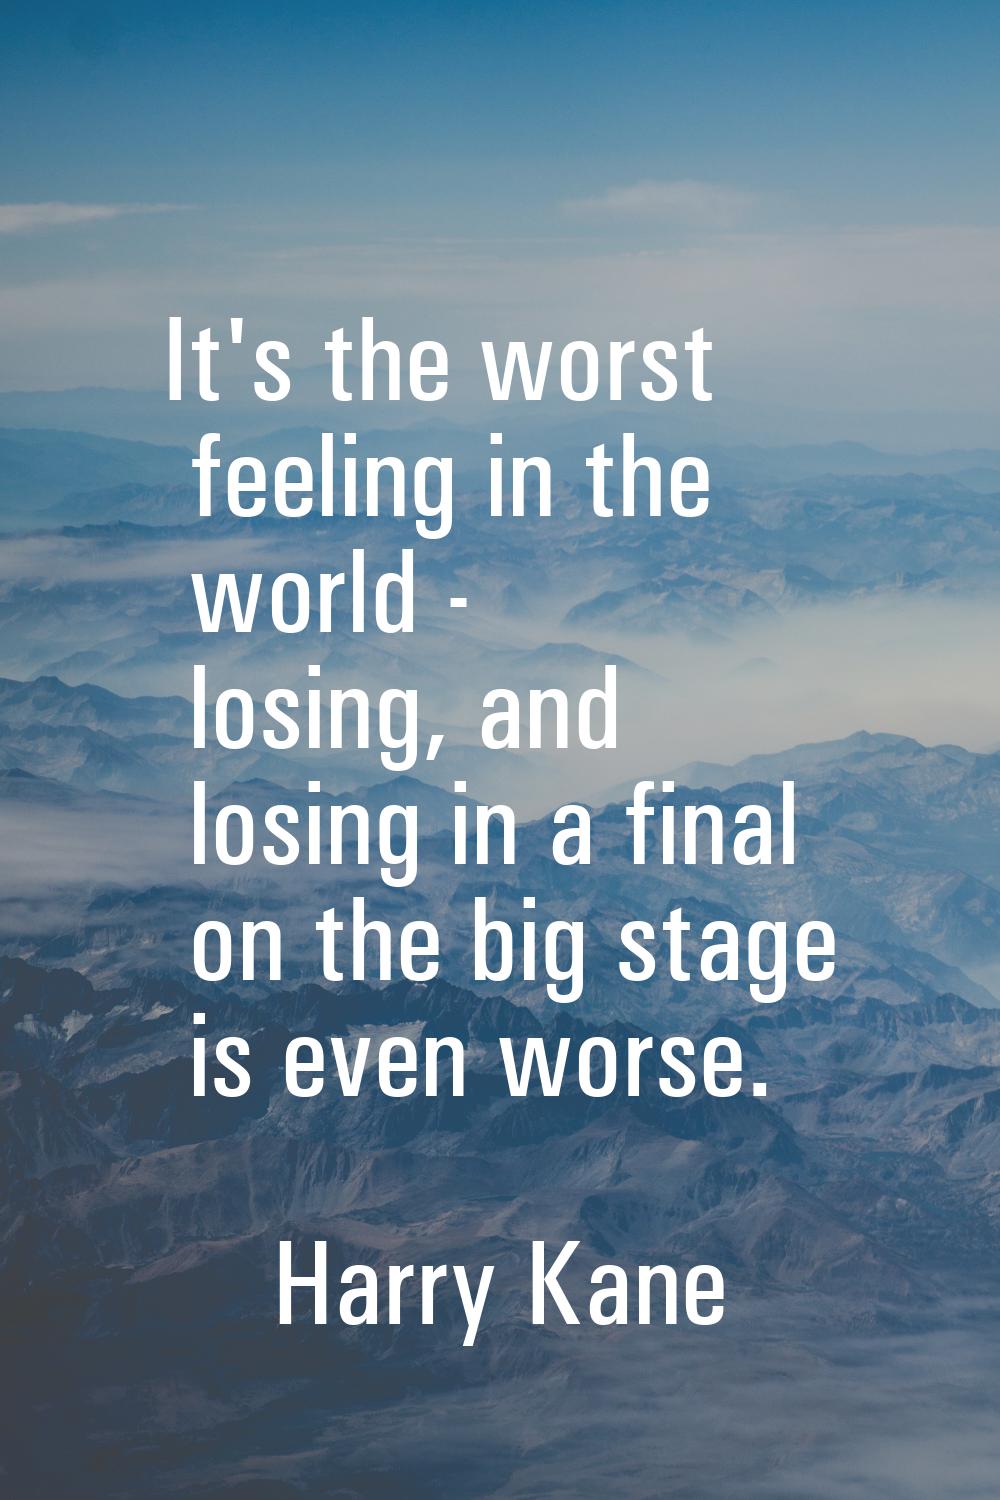 It's the worst feeling in the world - losing, and losing in a final on the big stage is even worse.